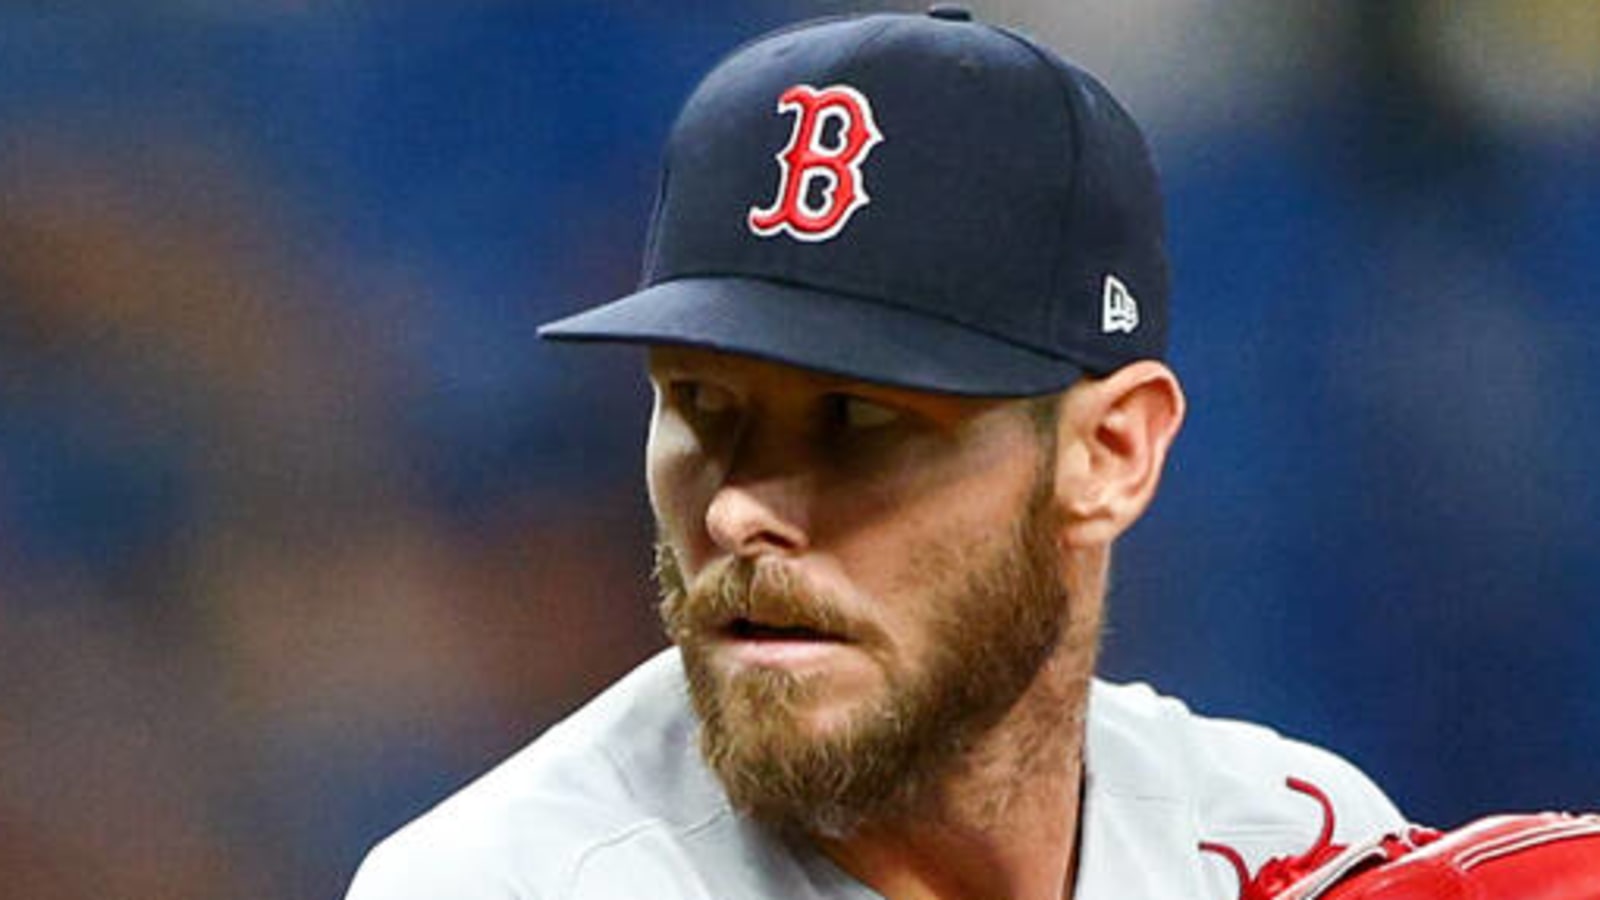 Red Sox pitcher Chris Sale has surgery to fix finger injury